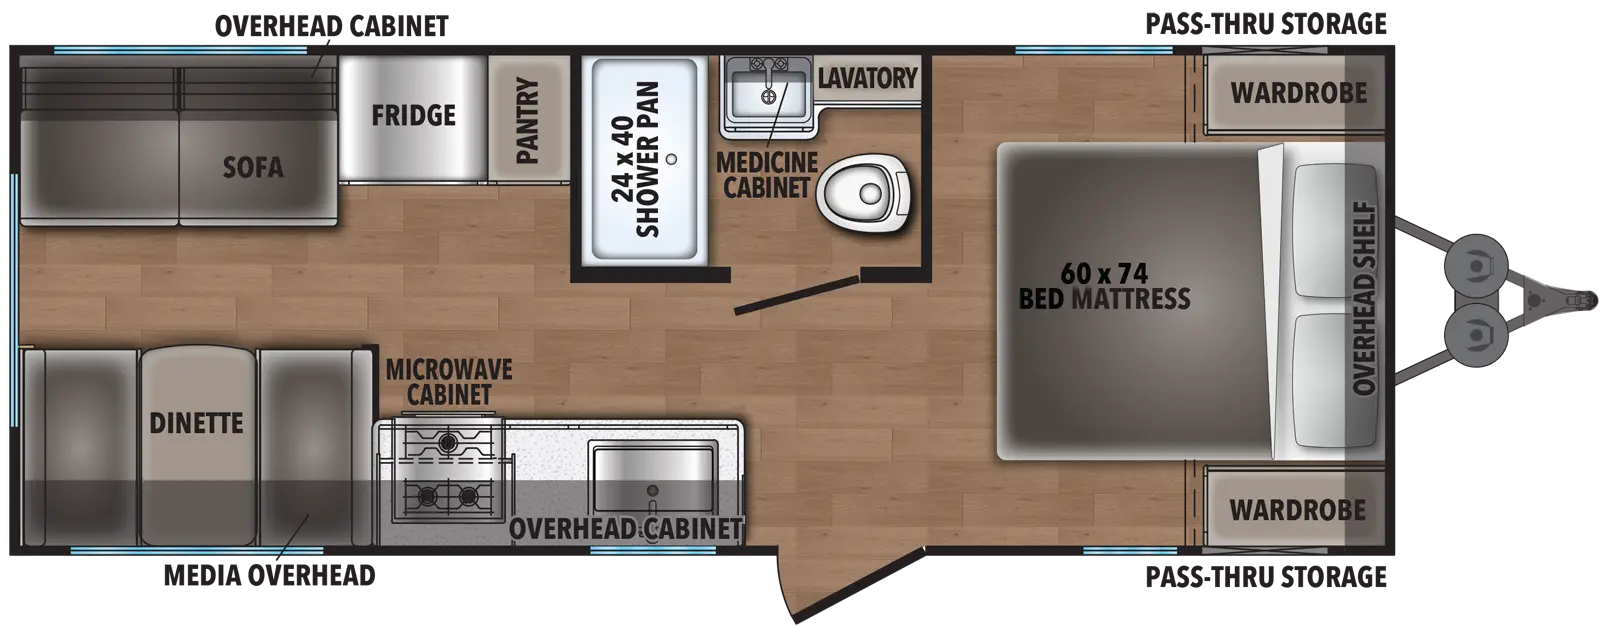 The 521CK has no slide outs and one entry door on the door side. Interior layout from front to back: bedroom with side-facing queen bed; bathroom; kitchen living dining area; kitchen with double basin sink, cook top stove, microwave cabinet, refrigerator, and overhead cabinet; sofa with overhead cabinet; and dinette with media overhead.